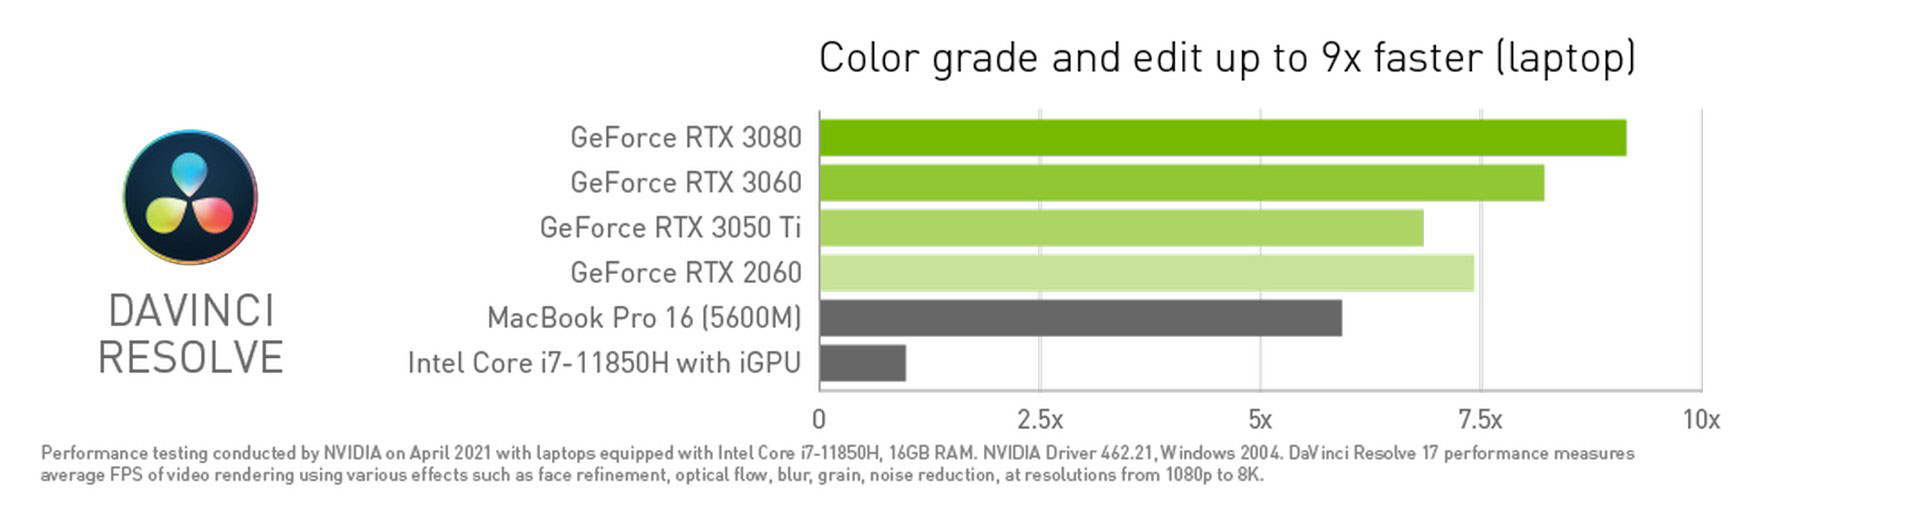 Nvidia RTX 4060 Ti - Editor's review by Nick Lear - ProVideo Coalition